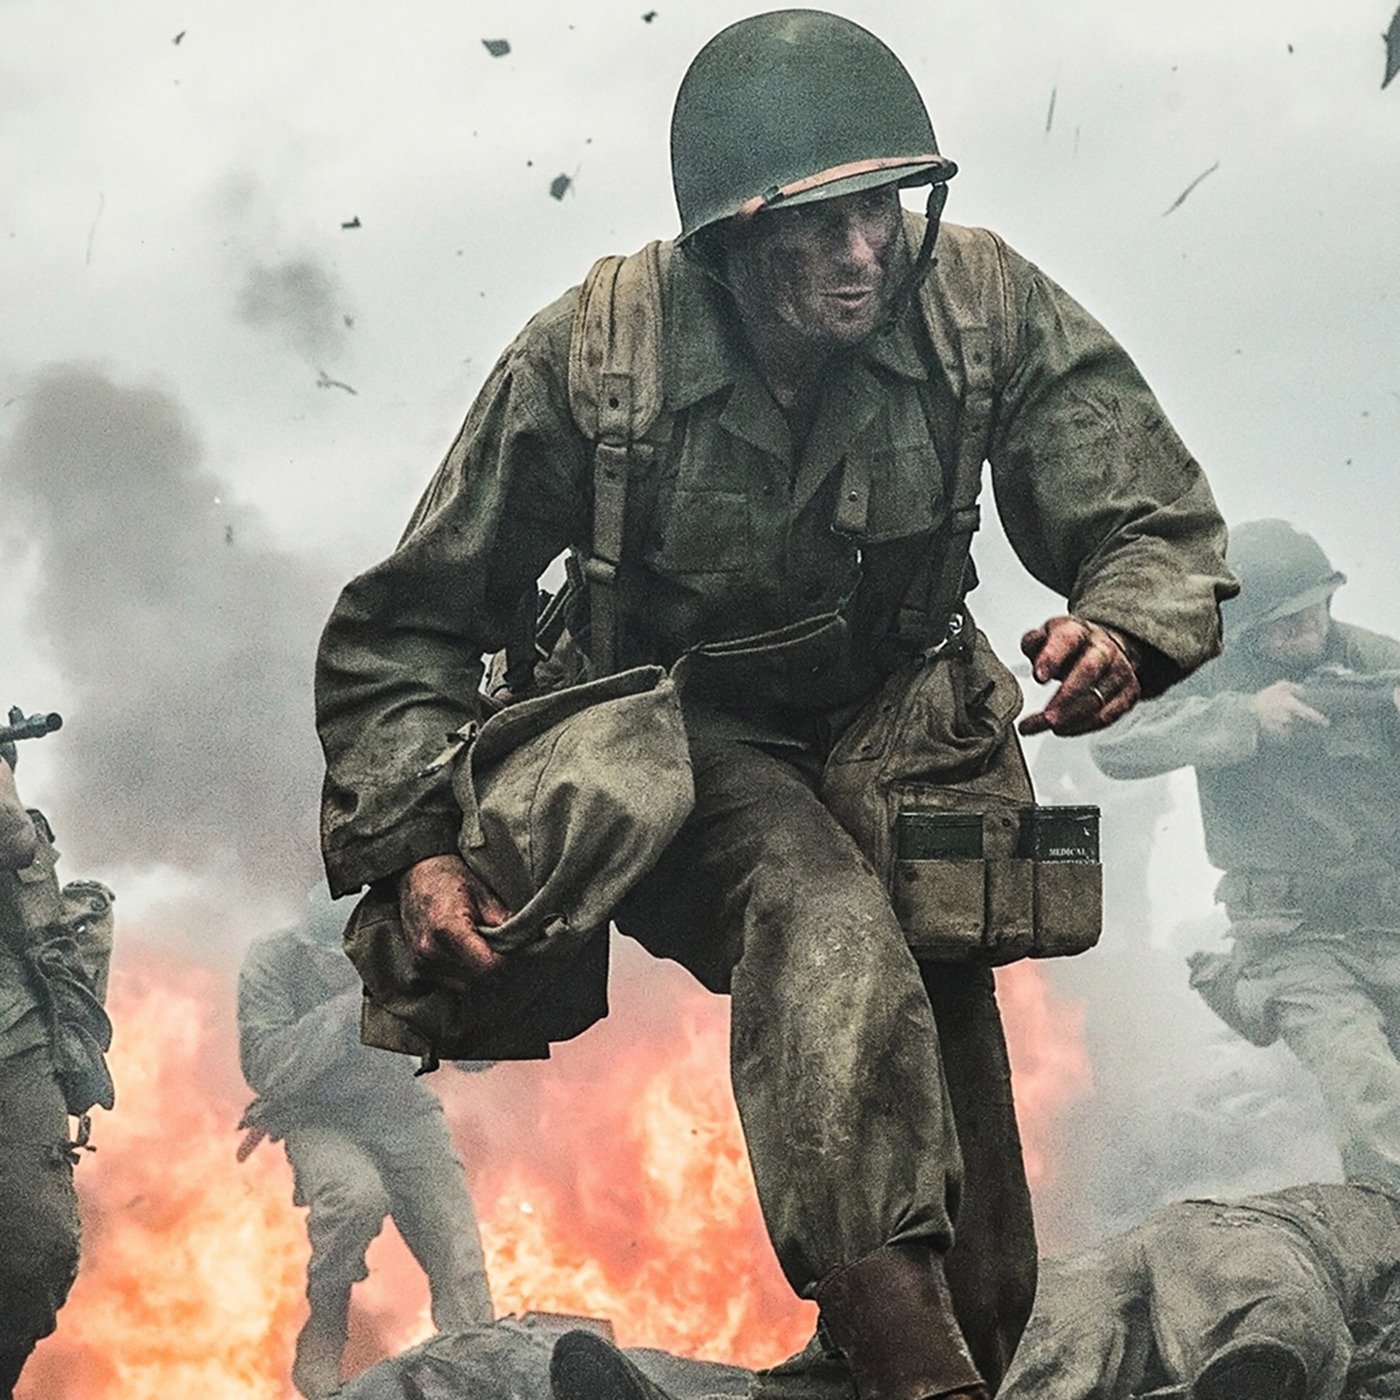 Best Military Movies & TV Shows, Ranked